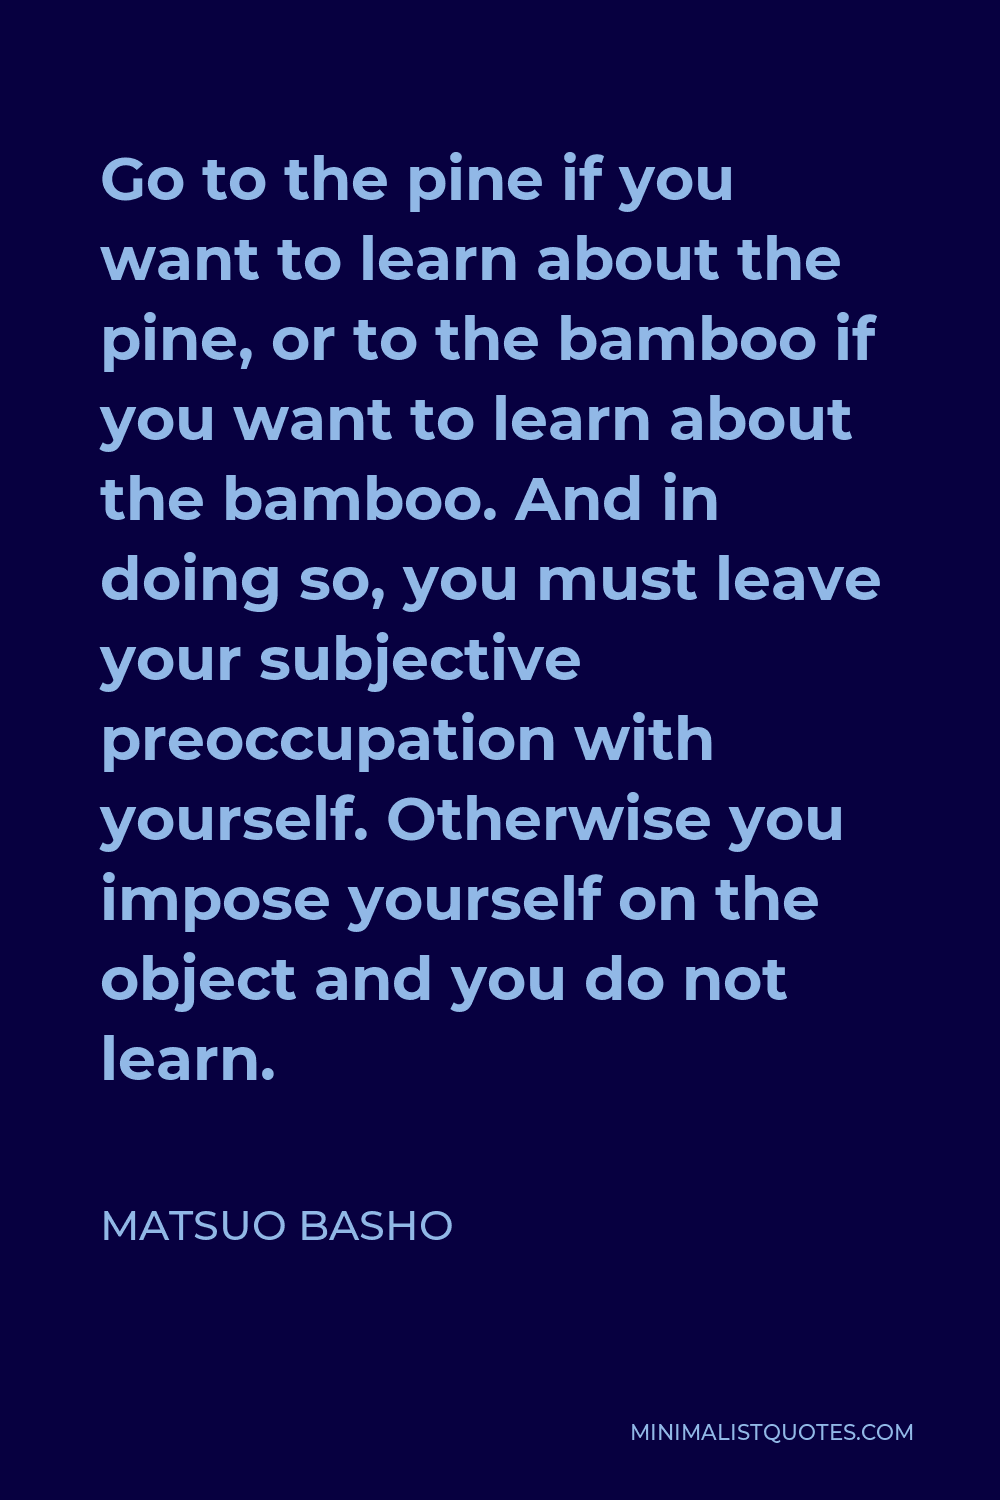 Matsuo Basho Quote - Go to the pine if you want to learn about the pine, or to the bamboo if you want to learn about the bamboo. And in doing so, you must leave your subjective preoccupation with yourself. Otherwise you impose yourself on the object and you do not learn.